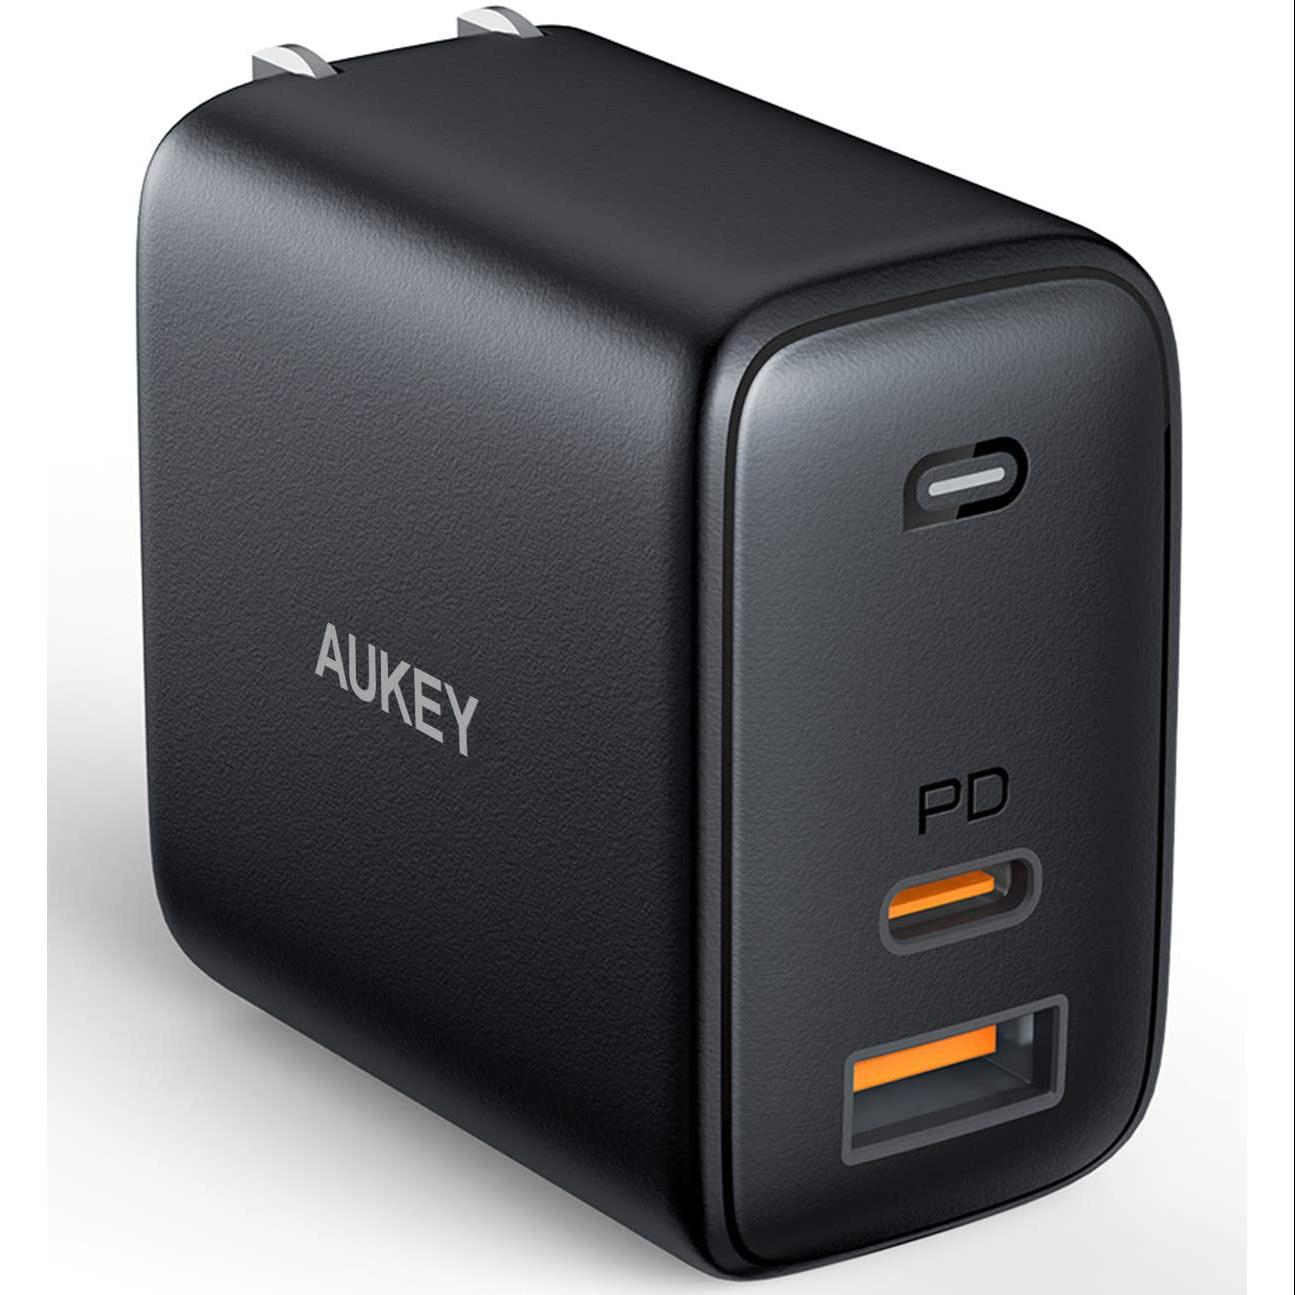 Aukey 65W GaN Omnia USB-C and USB-A Wall Charger for $26.59 Shipped